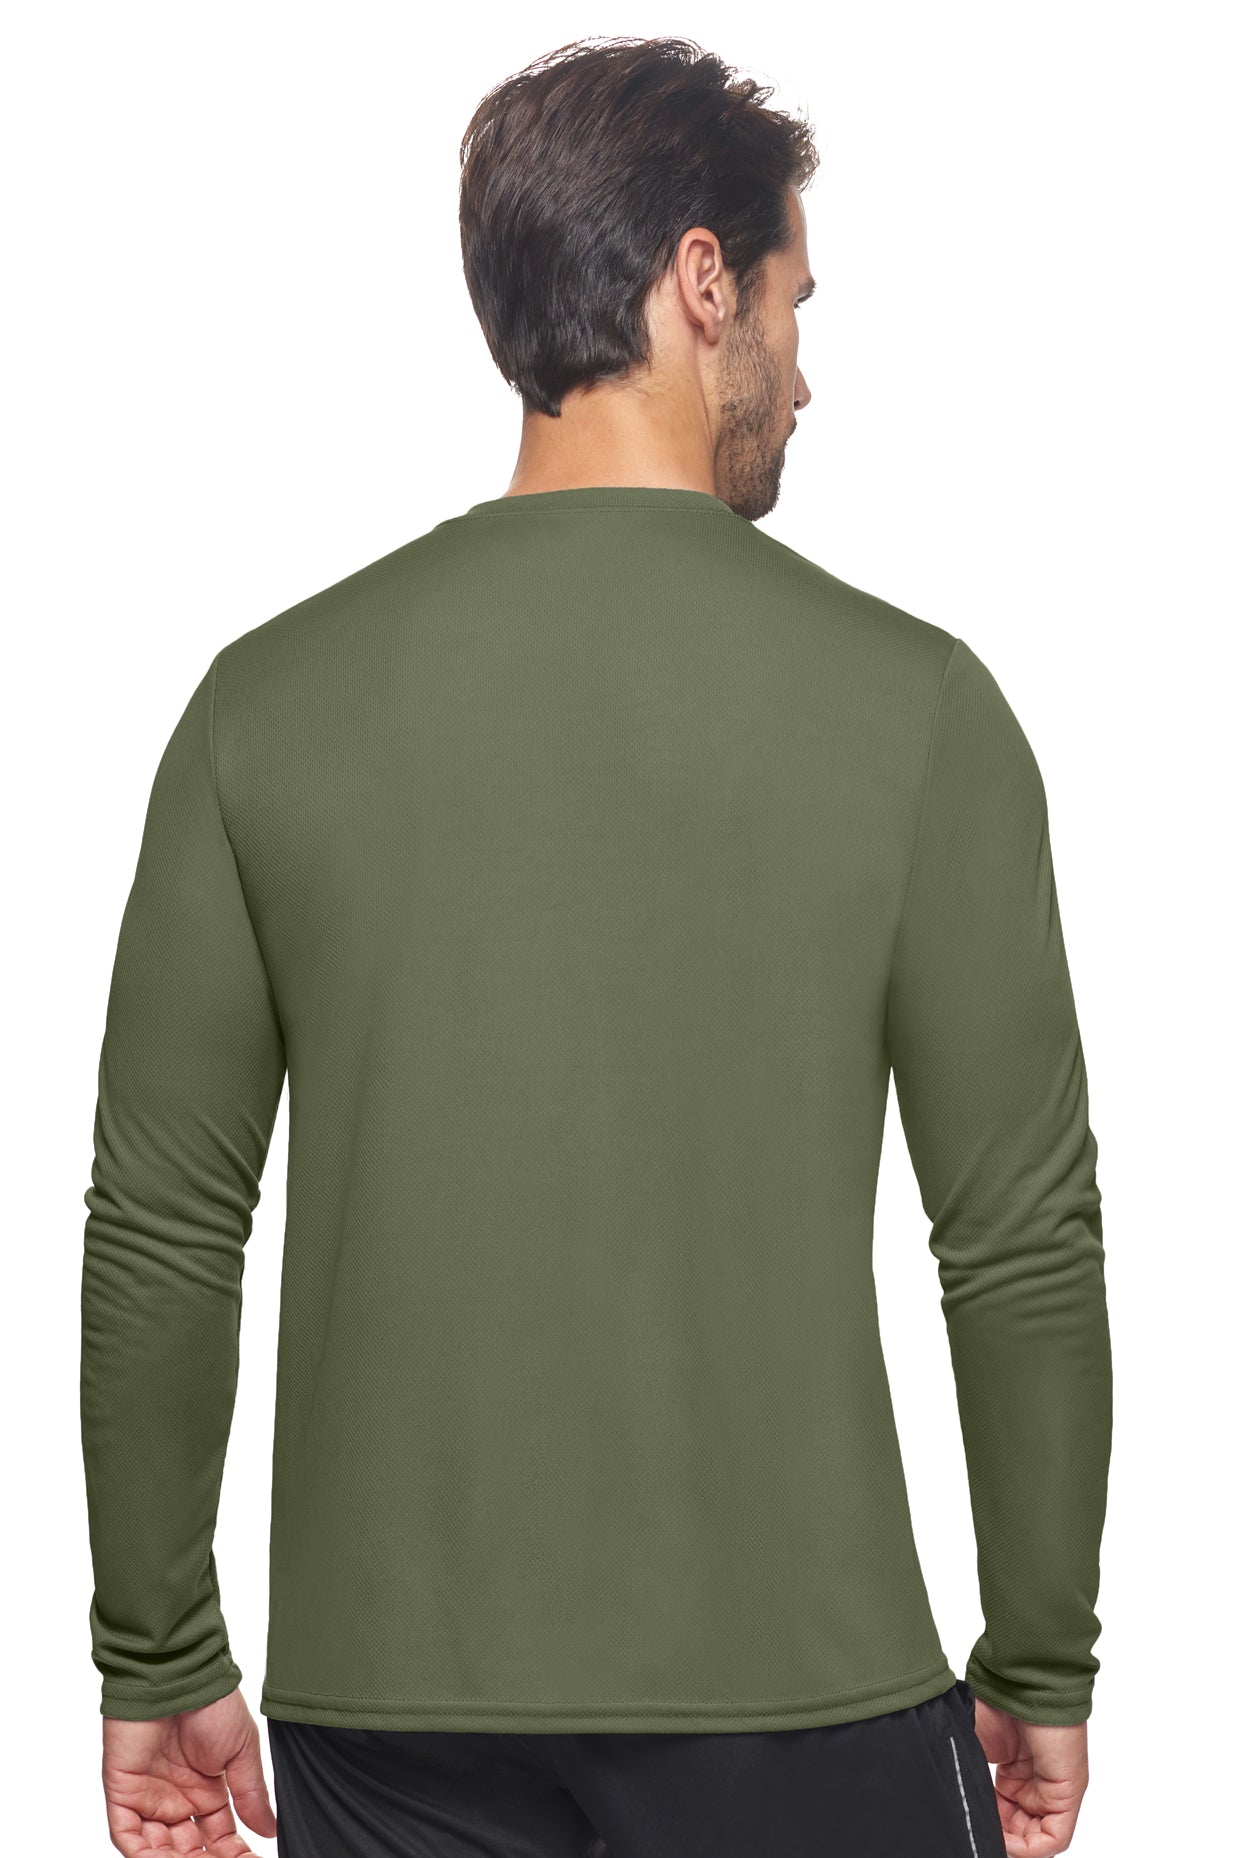 Expert Brand Wholesale Sportswear Activewear Made in USA Oxymesh™ Long Sleeve Tec Tee AJ901D military green 3#military-green